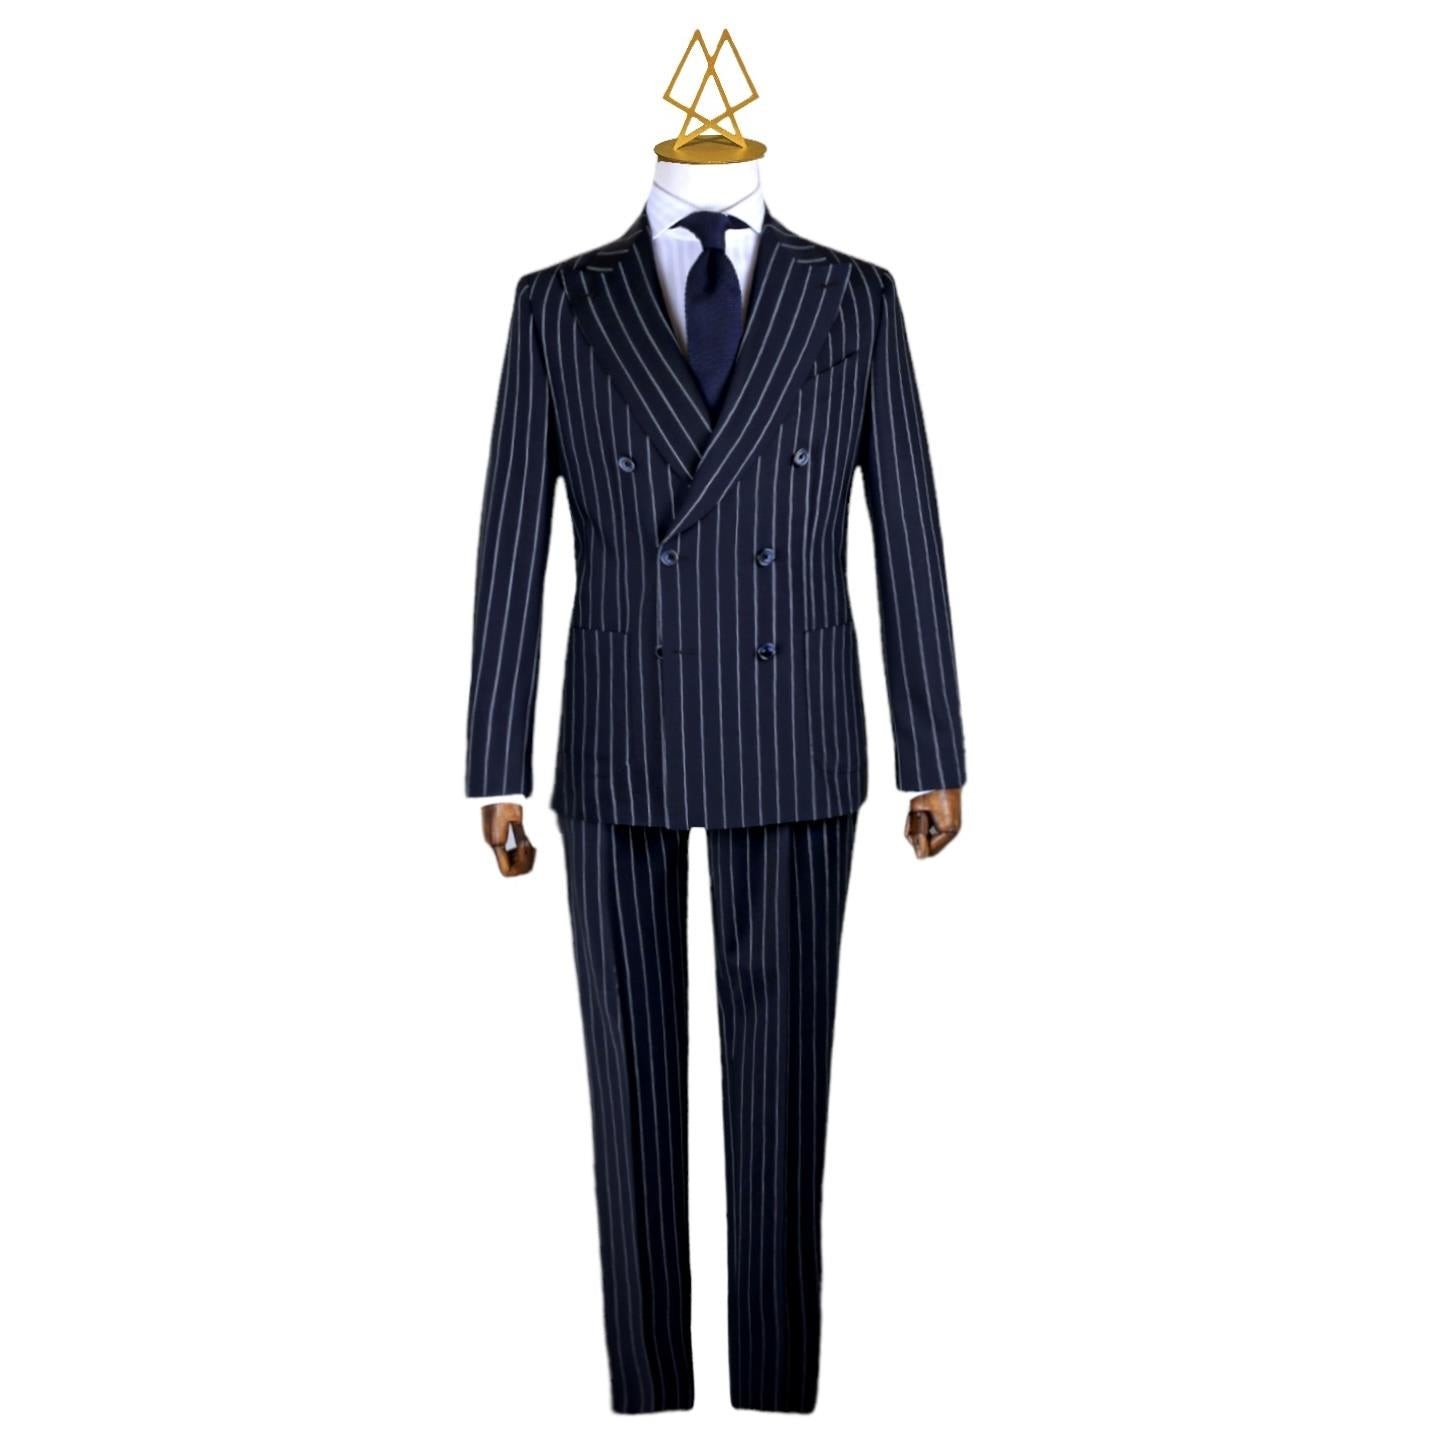 NAVY BLUE STRIPED DOUBLE BREASTED TROPHY SUIT